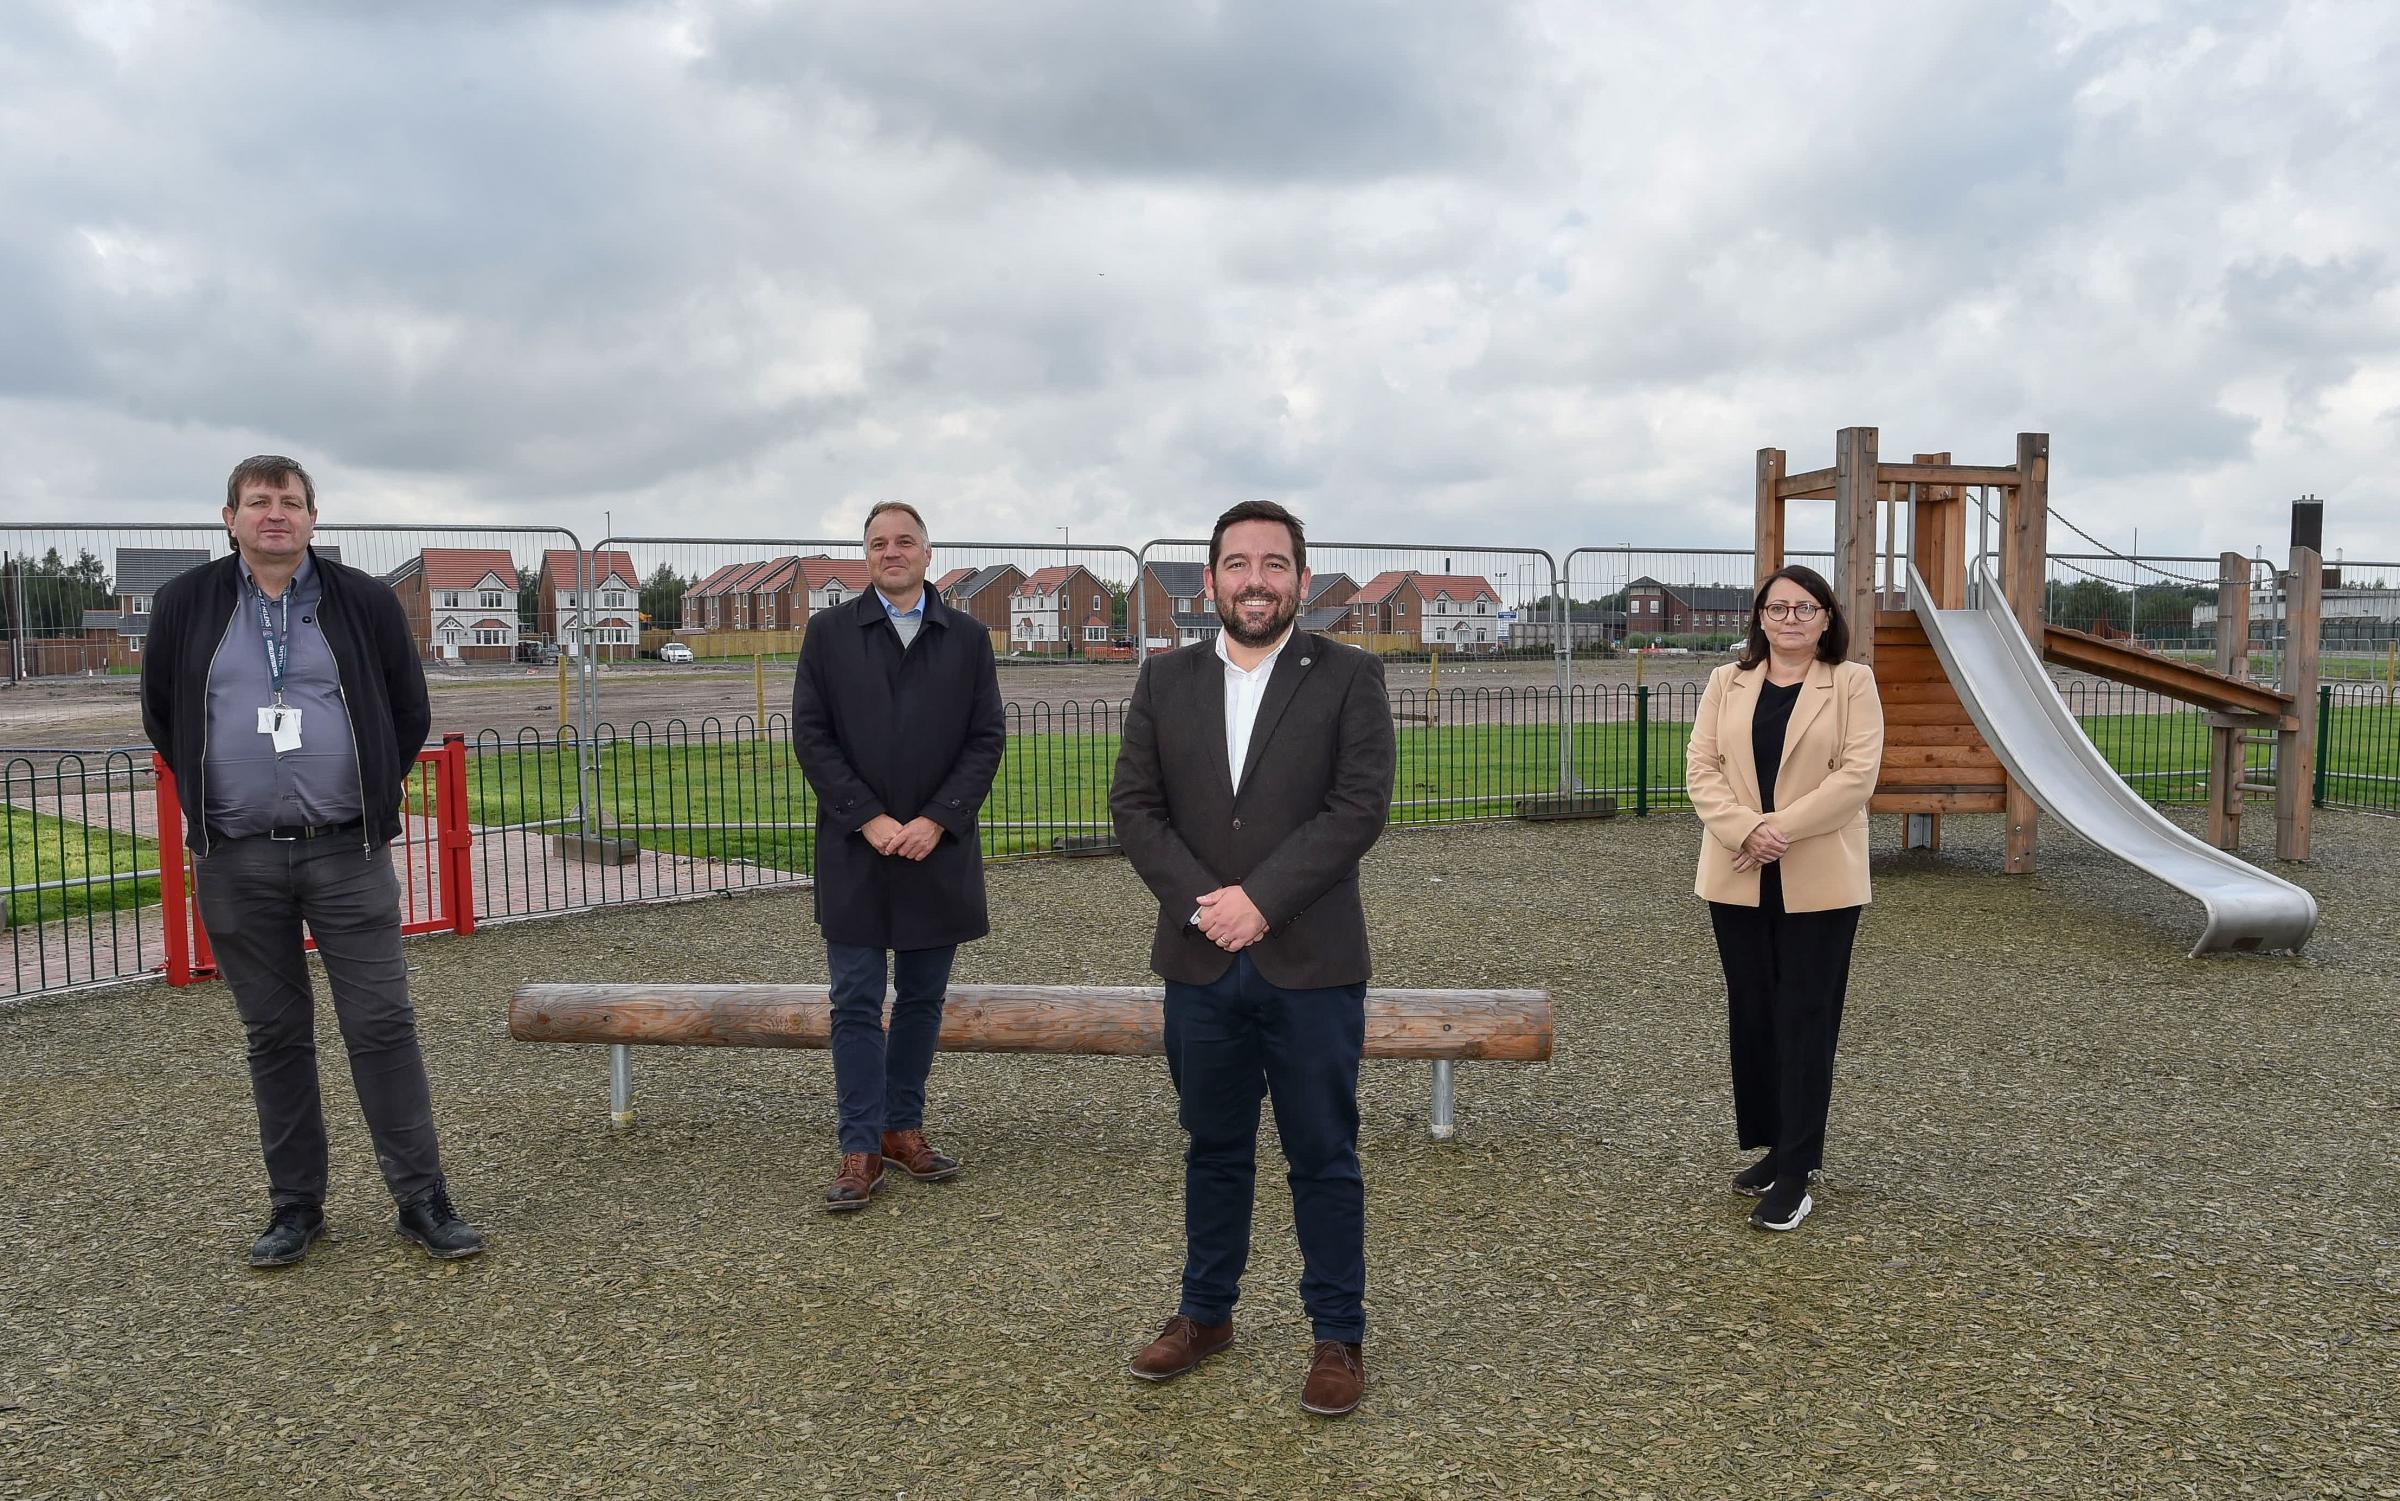 Cllr Richard McCauley; Steven Knowles, Cllr David Baines and Lisa Harris at the new family park on site ready for homes to be built at Moss Nook